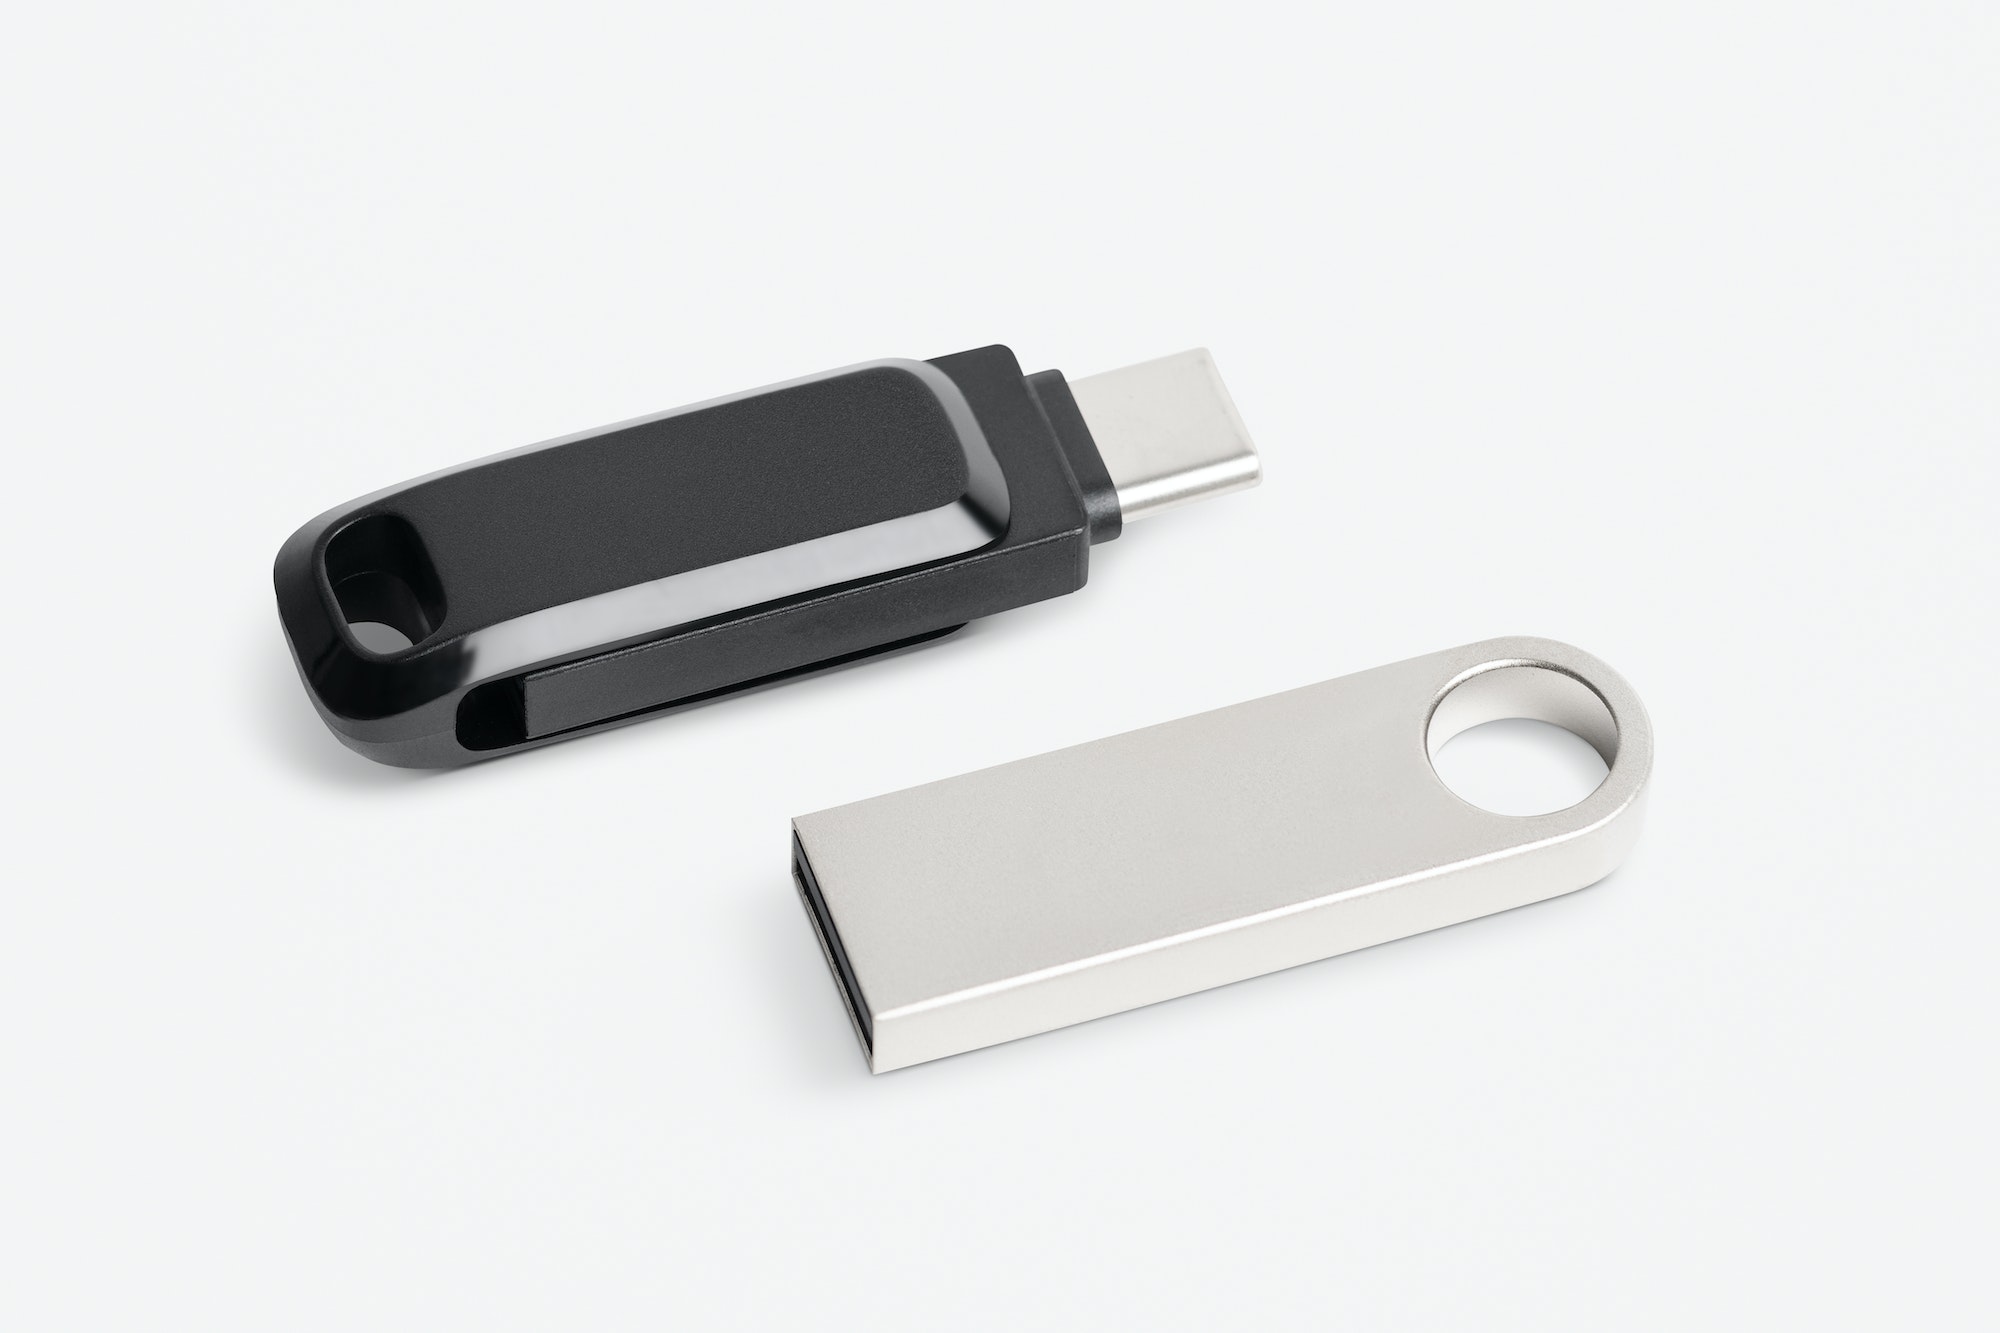 How the World’s Most Secure USB Can Keep Your Data Safe